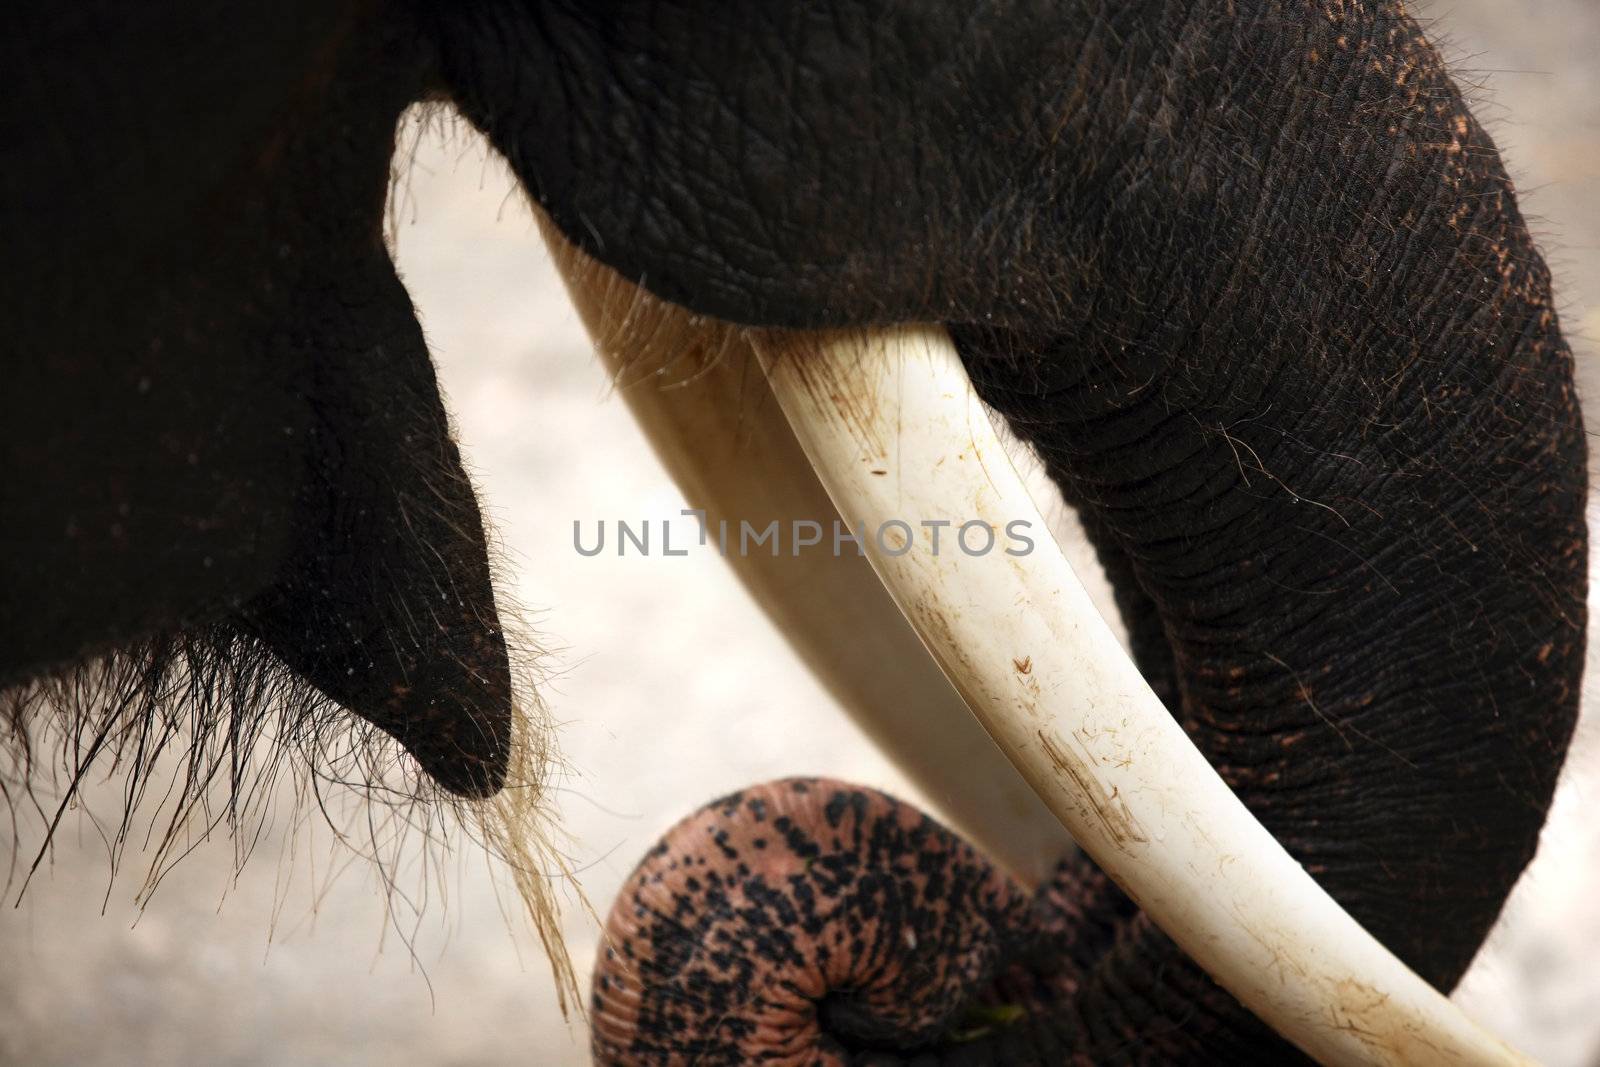 Tusks of the elephant close-up